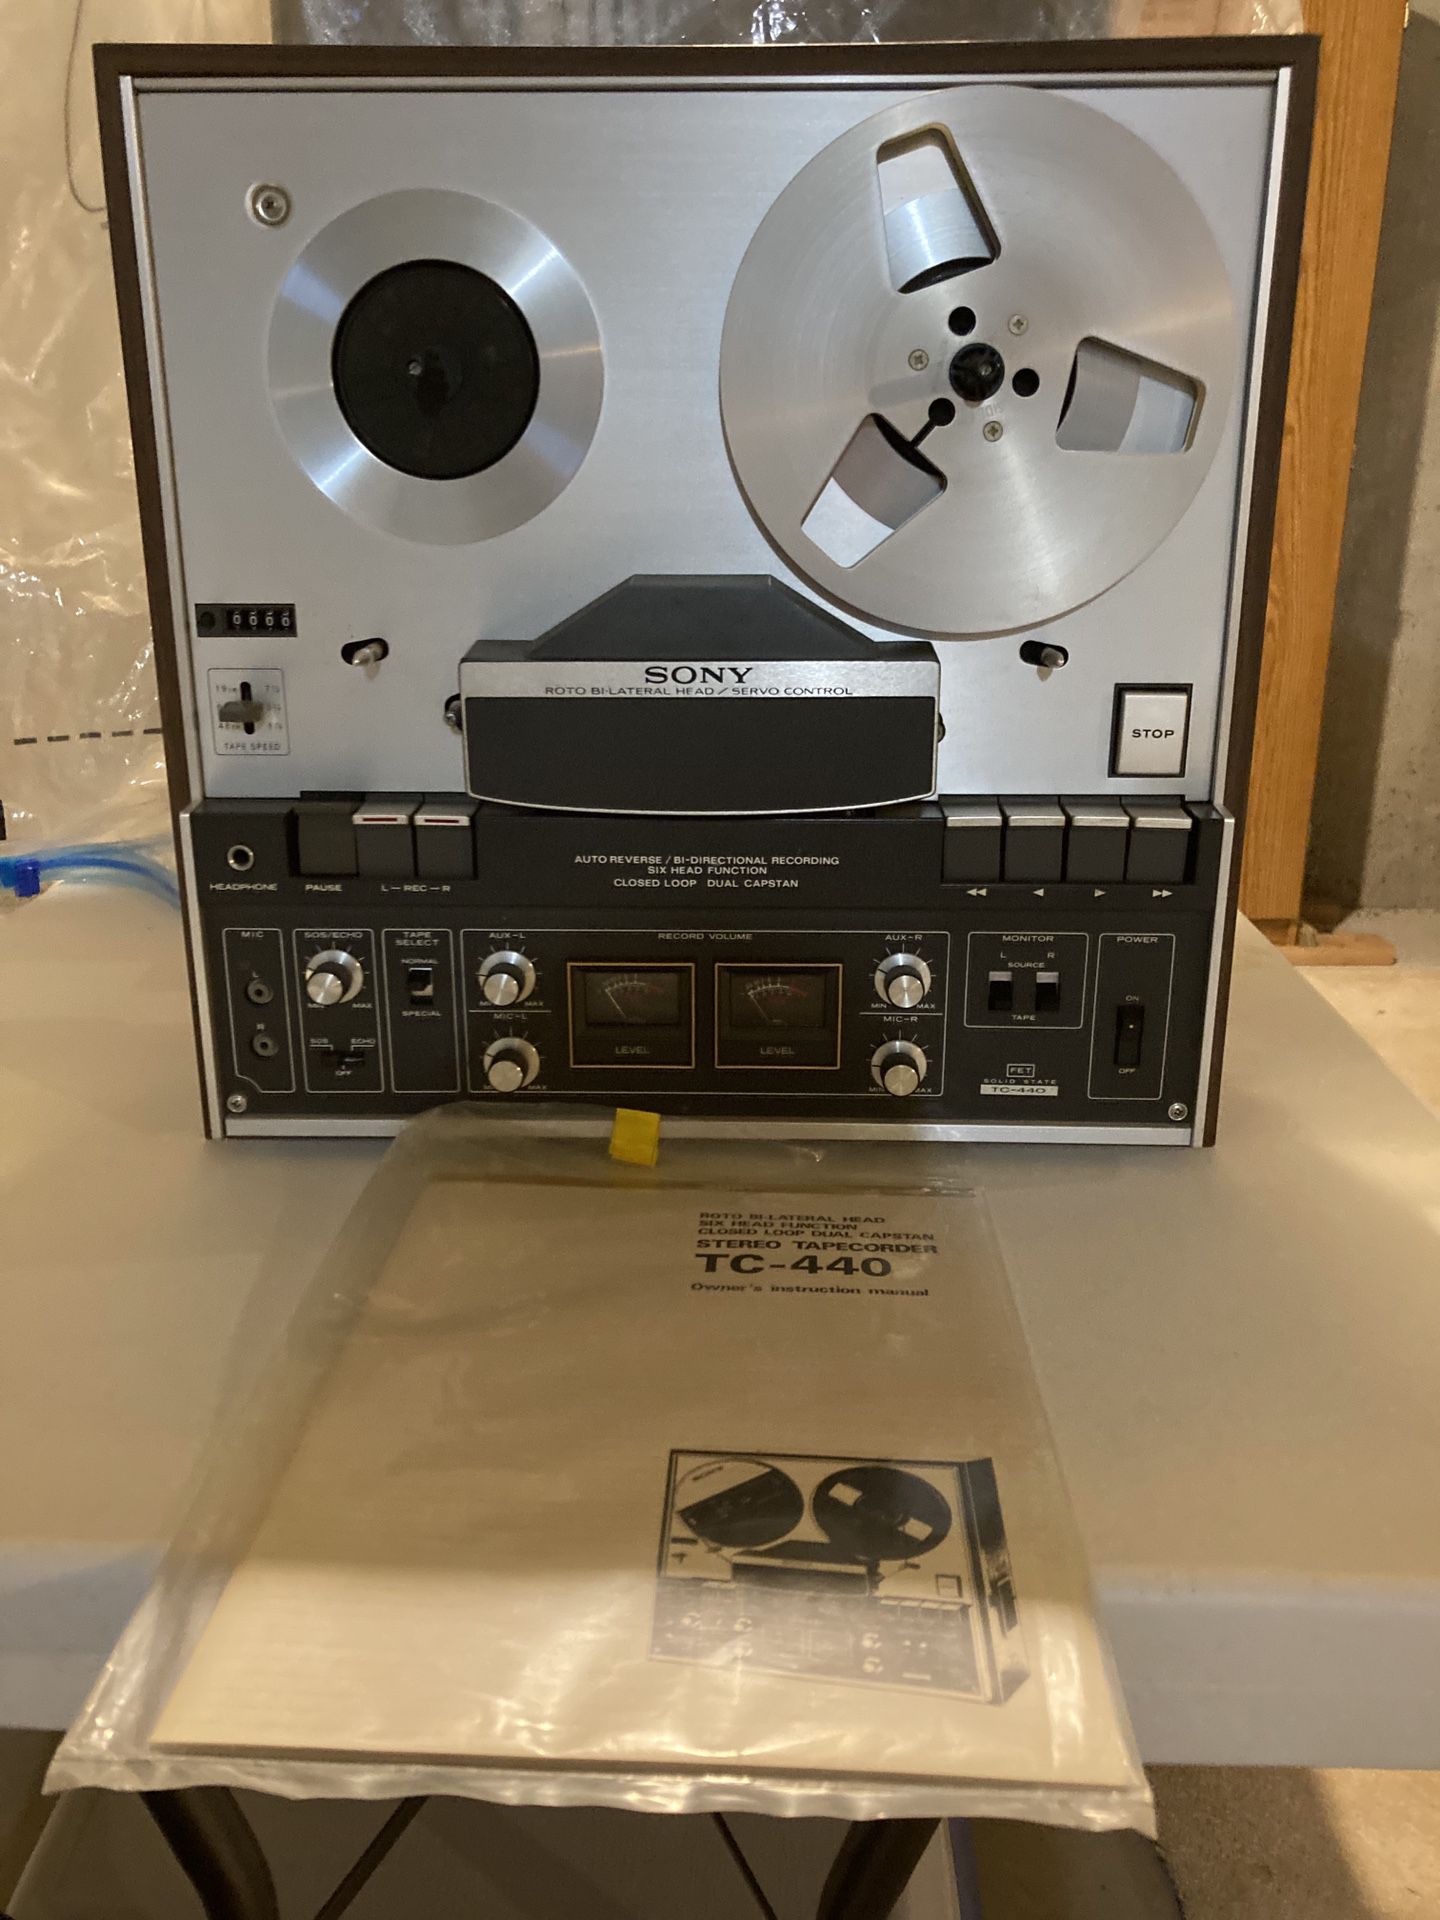 Vintage Sony TC-440 Reel to Reel Tape Deck for Sale in Mechanicsburg, PA -  OfferUp